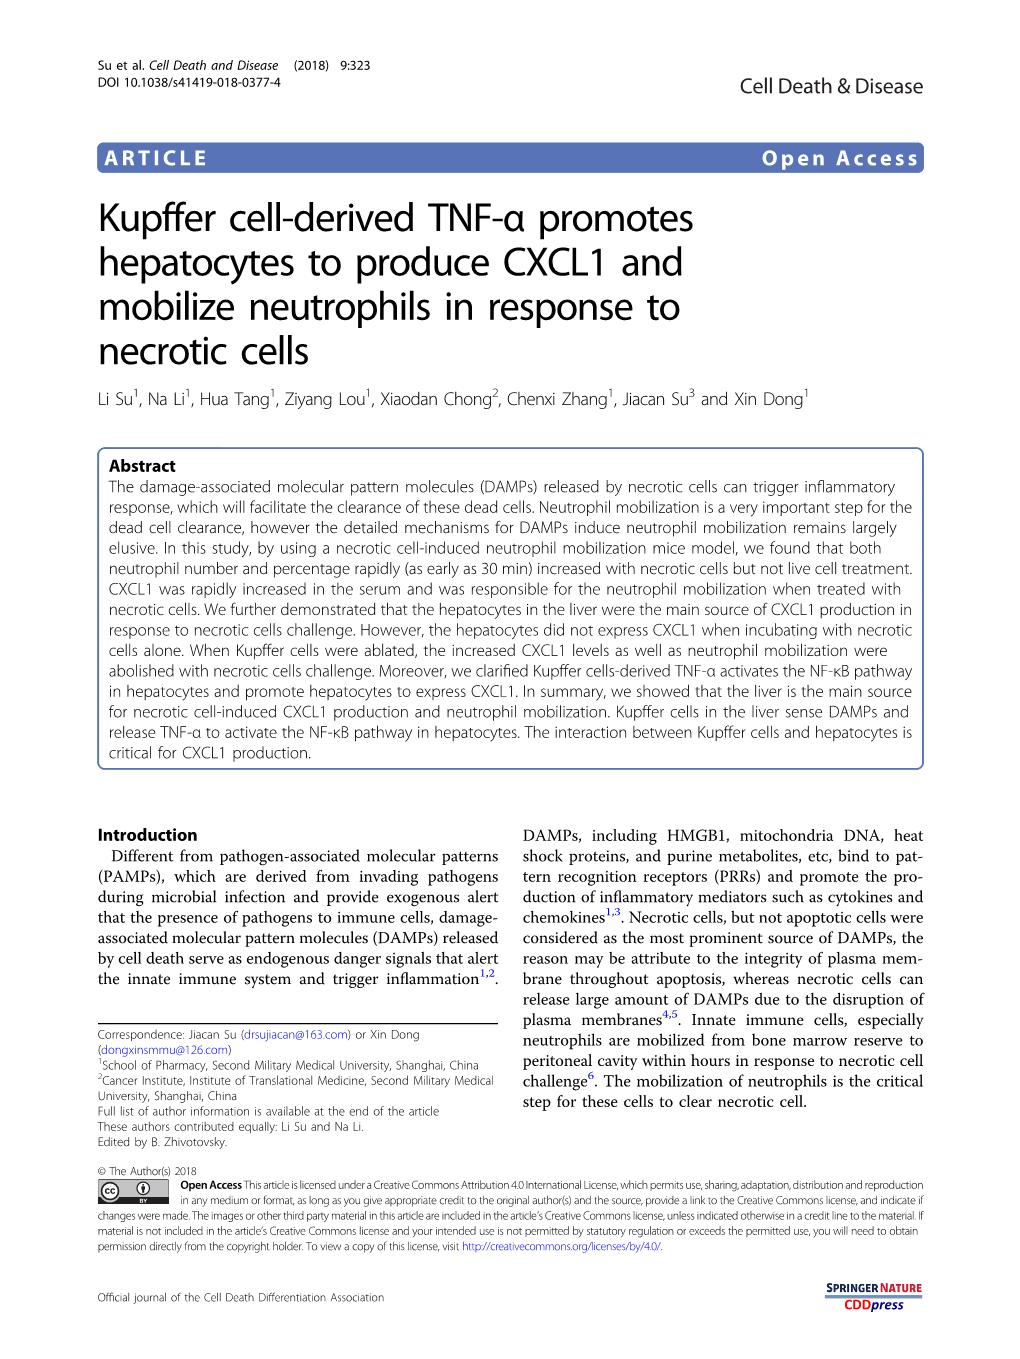 Kupffer Cell-Derived TNF-Î± Promotes Hepatocytes to Produce CXCL1 And